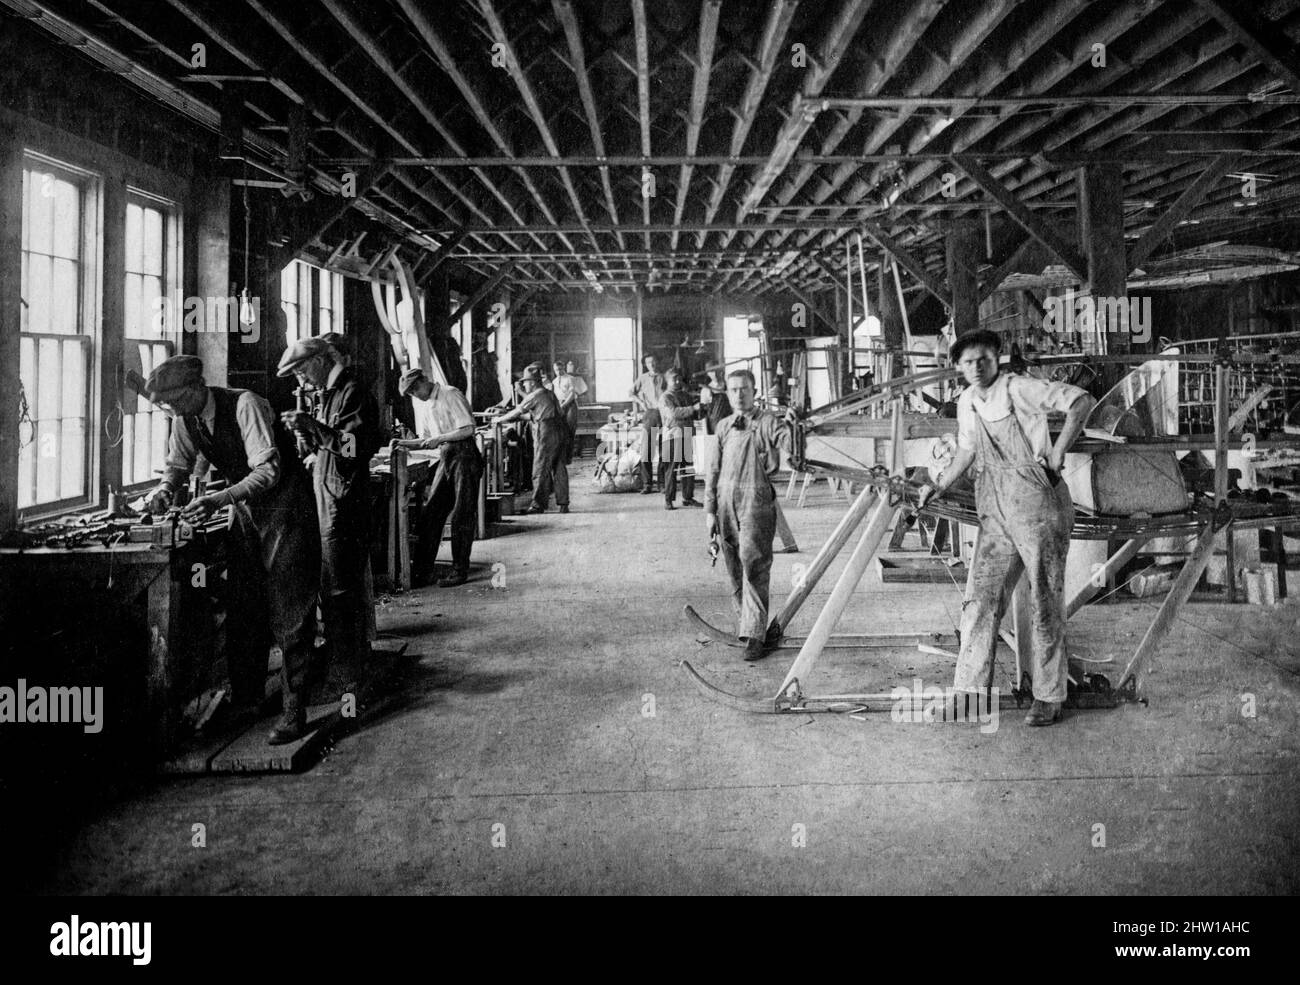 An early 20th century photograph of an aircraft erecting room in Ithaca, New York, United States. In 1914, the Ithaca Board of Trade recognized the potential in aviation development and invited g aircraft designers, William T. and Oliver W. Thomas or “the Thomas brothers” to Ithaca to set up an aircraft manufacturing plant. Stock Photo